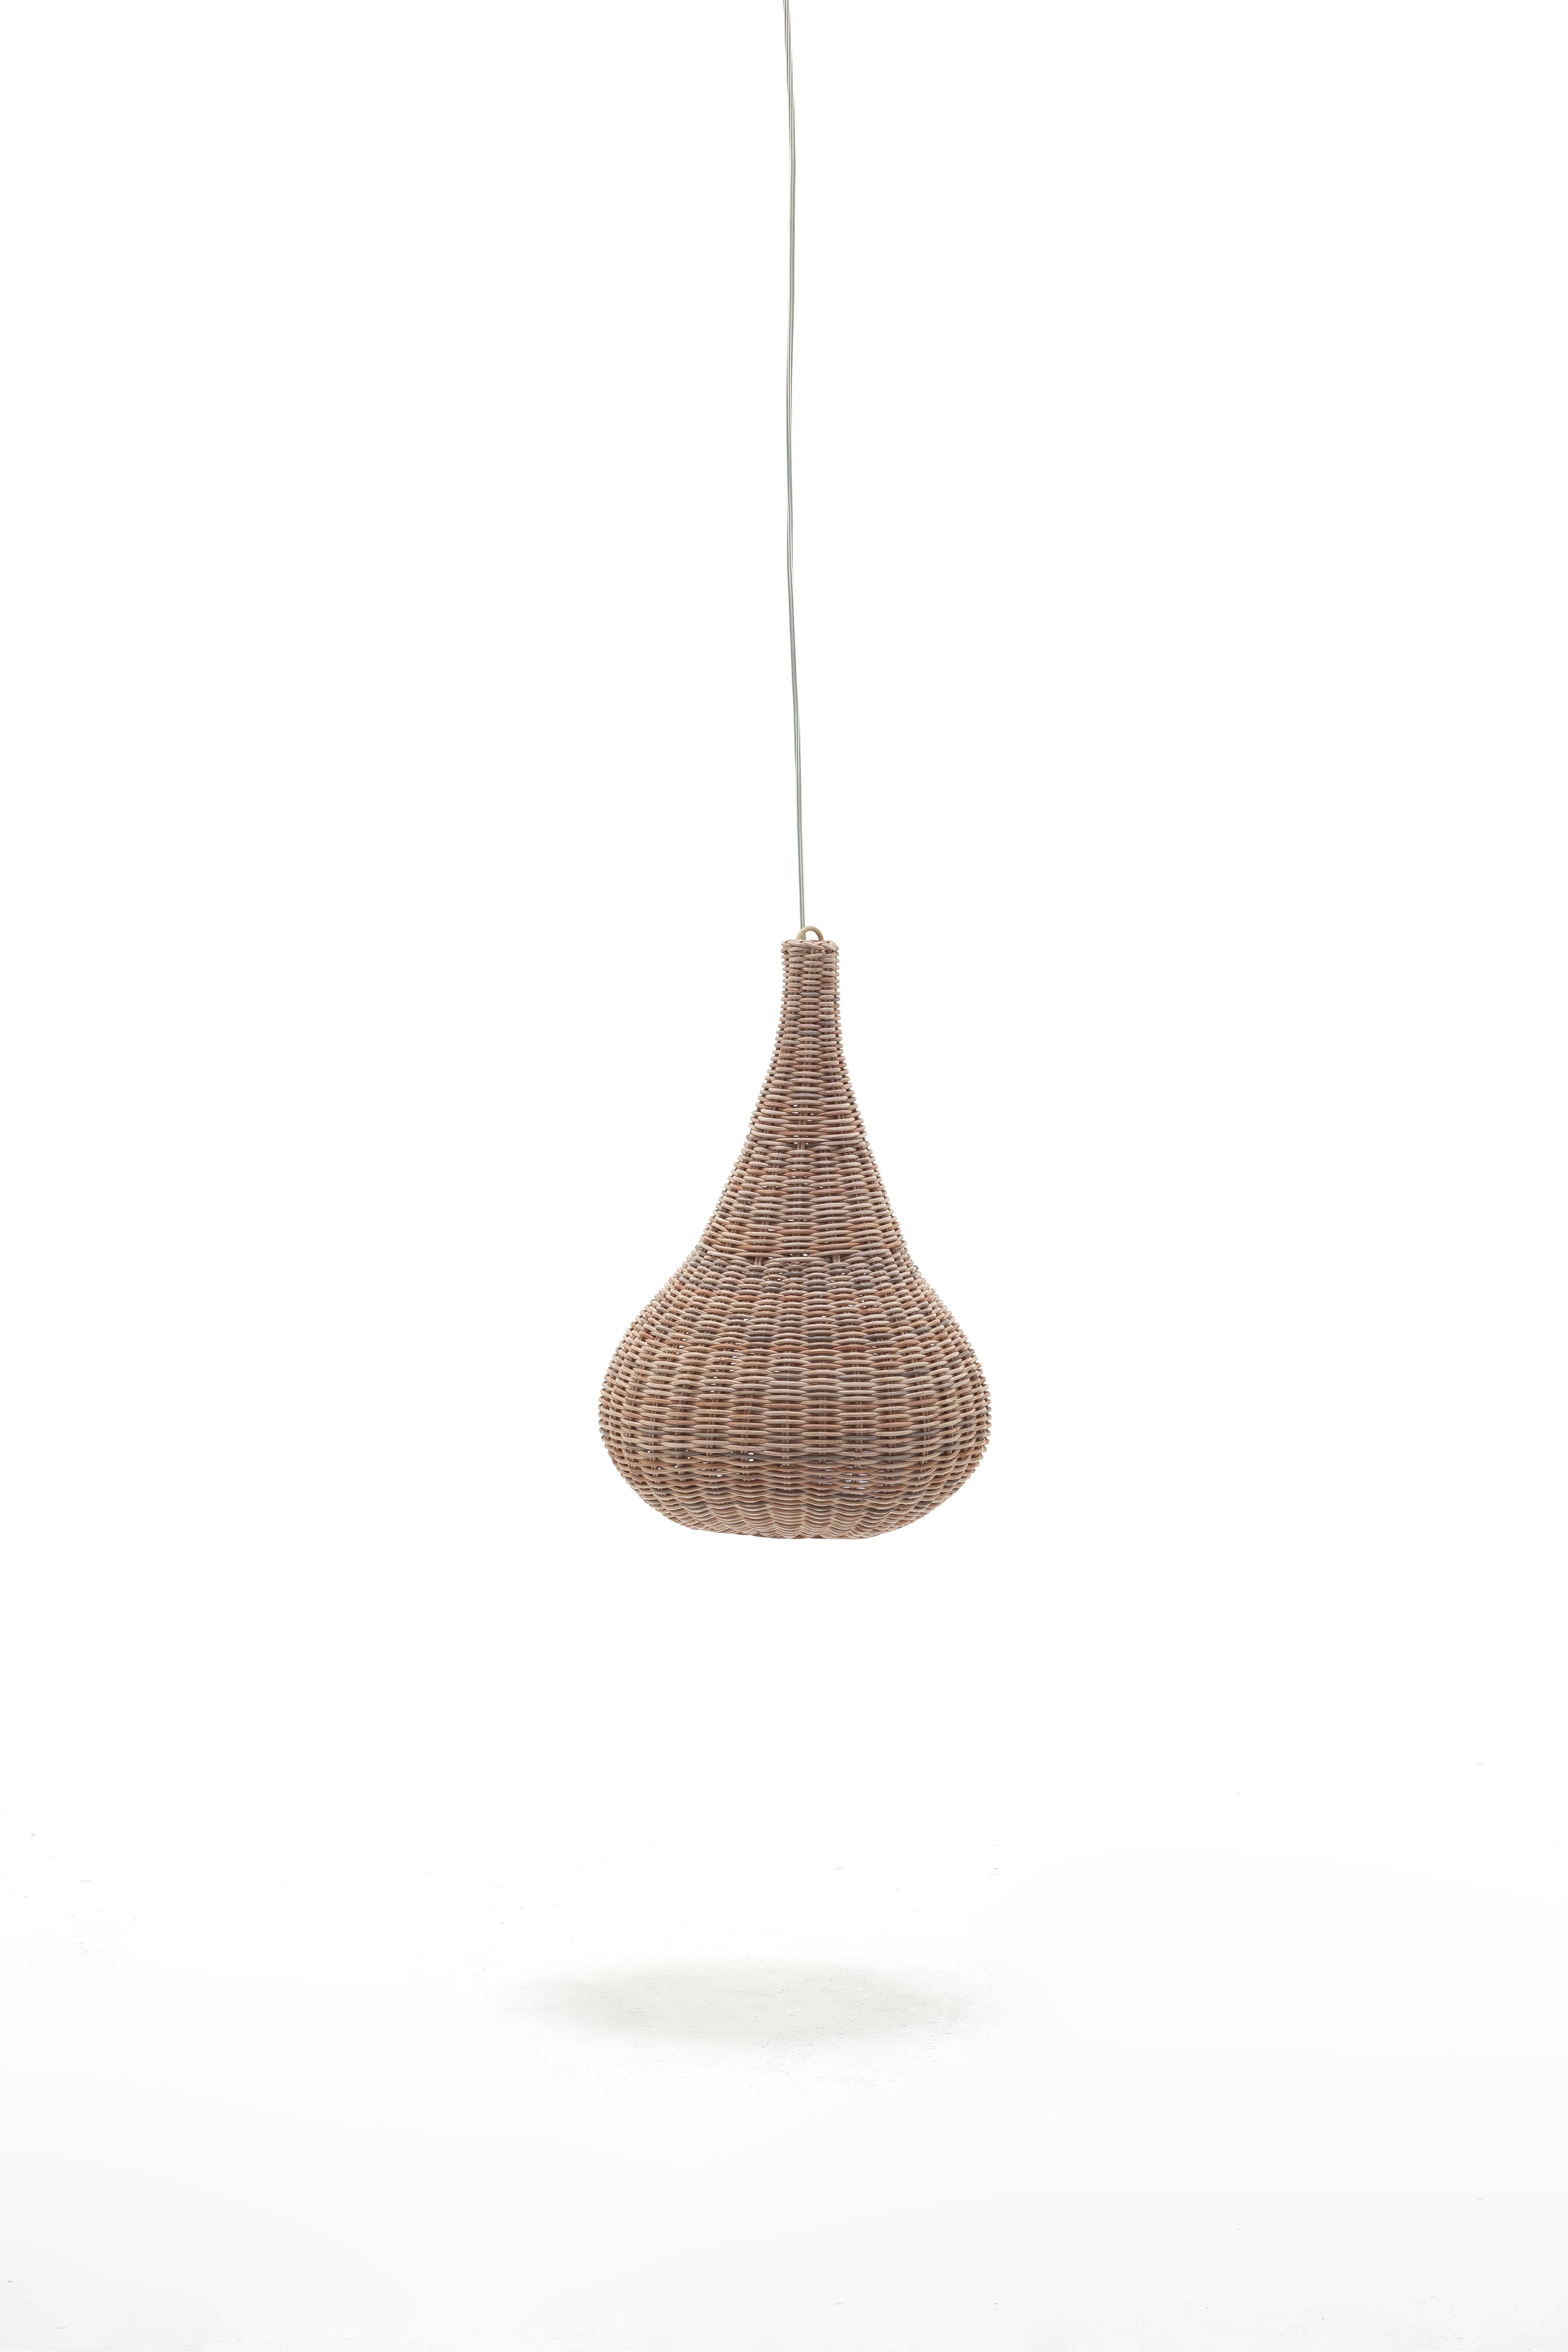 Sinuous lines reminiscent of the enveloping shape of a nest characterise the family of suspension lamps SPIN 95/96. The wraparound teardrop structure is made entirely of natural woven wicker, lacquered in matt white, grey, ocean, dove-grey or black.